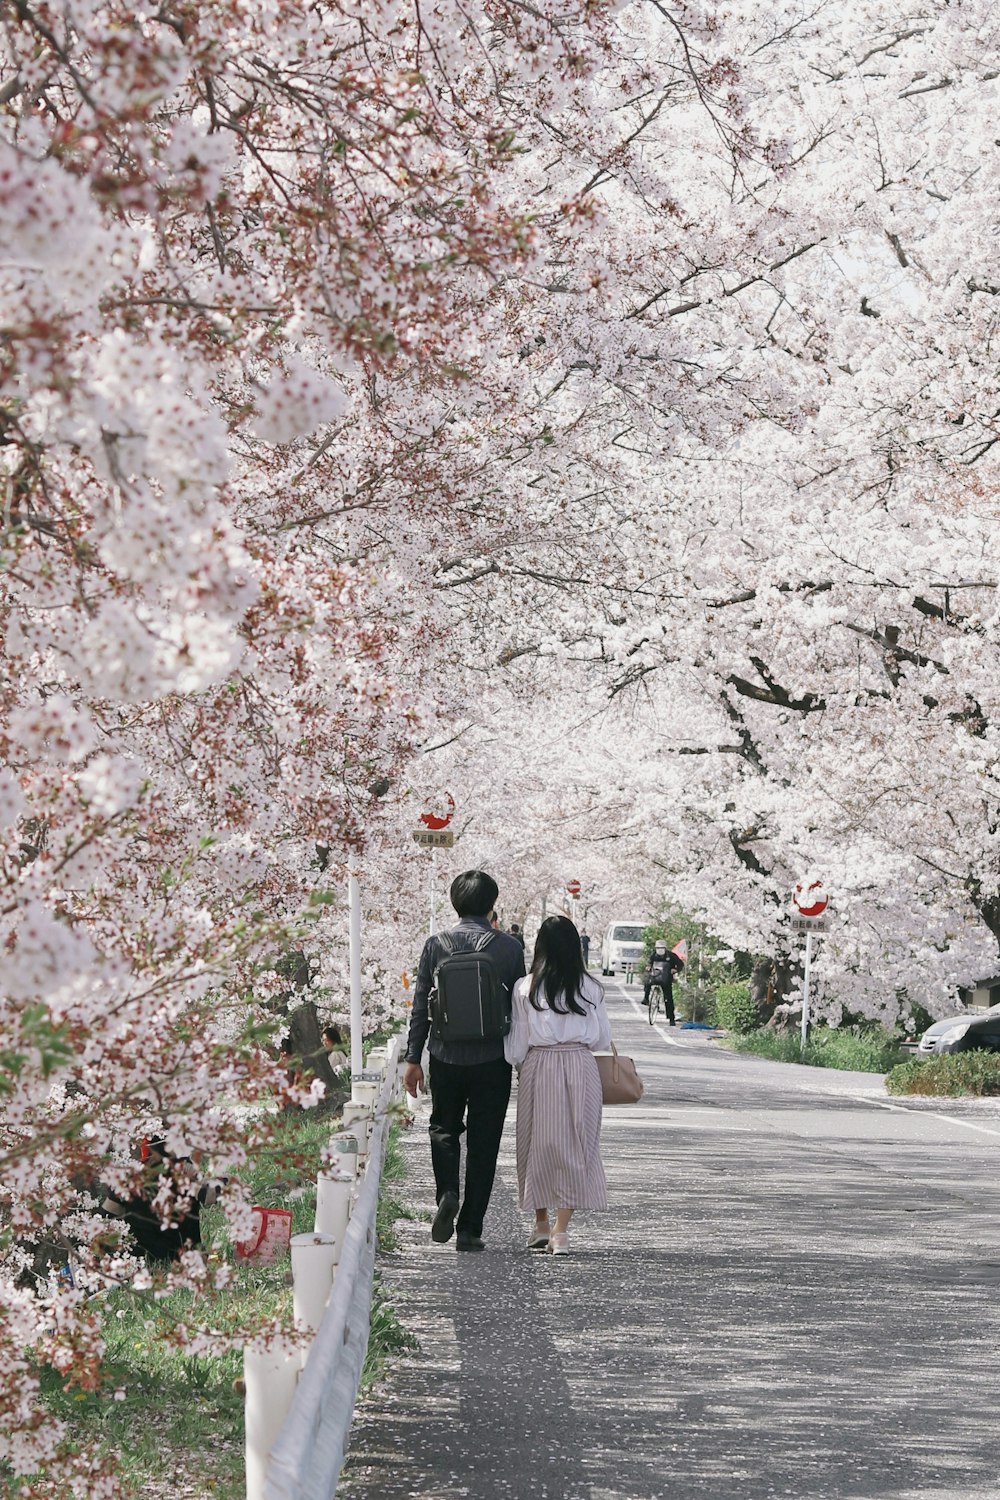 man and woman walking on road between cherry blossom trees during daytime